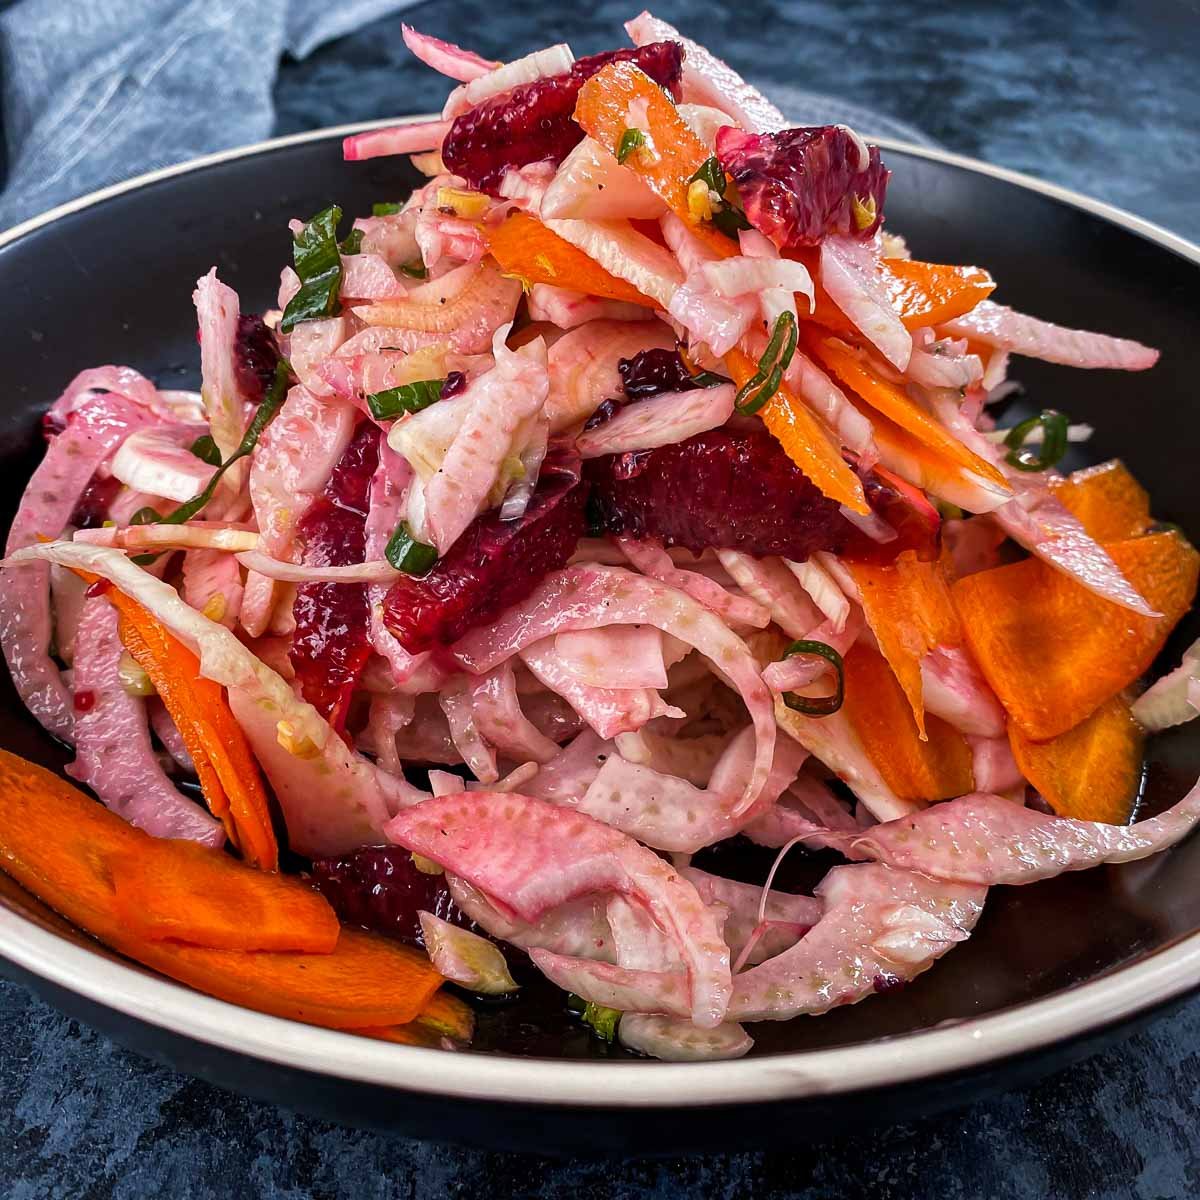 Fennel Salad with Blood Orange and Carrots in a bowl